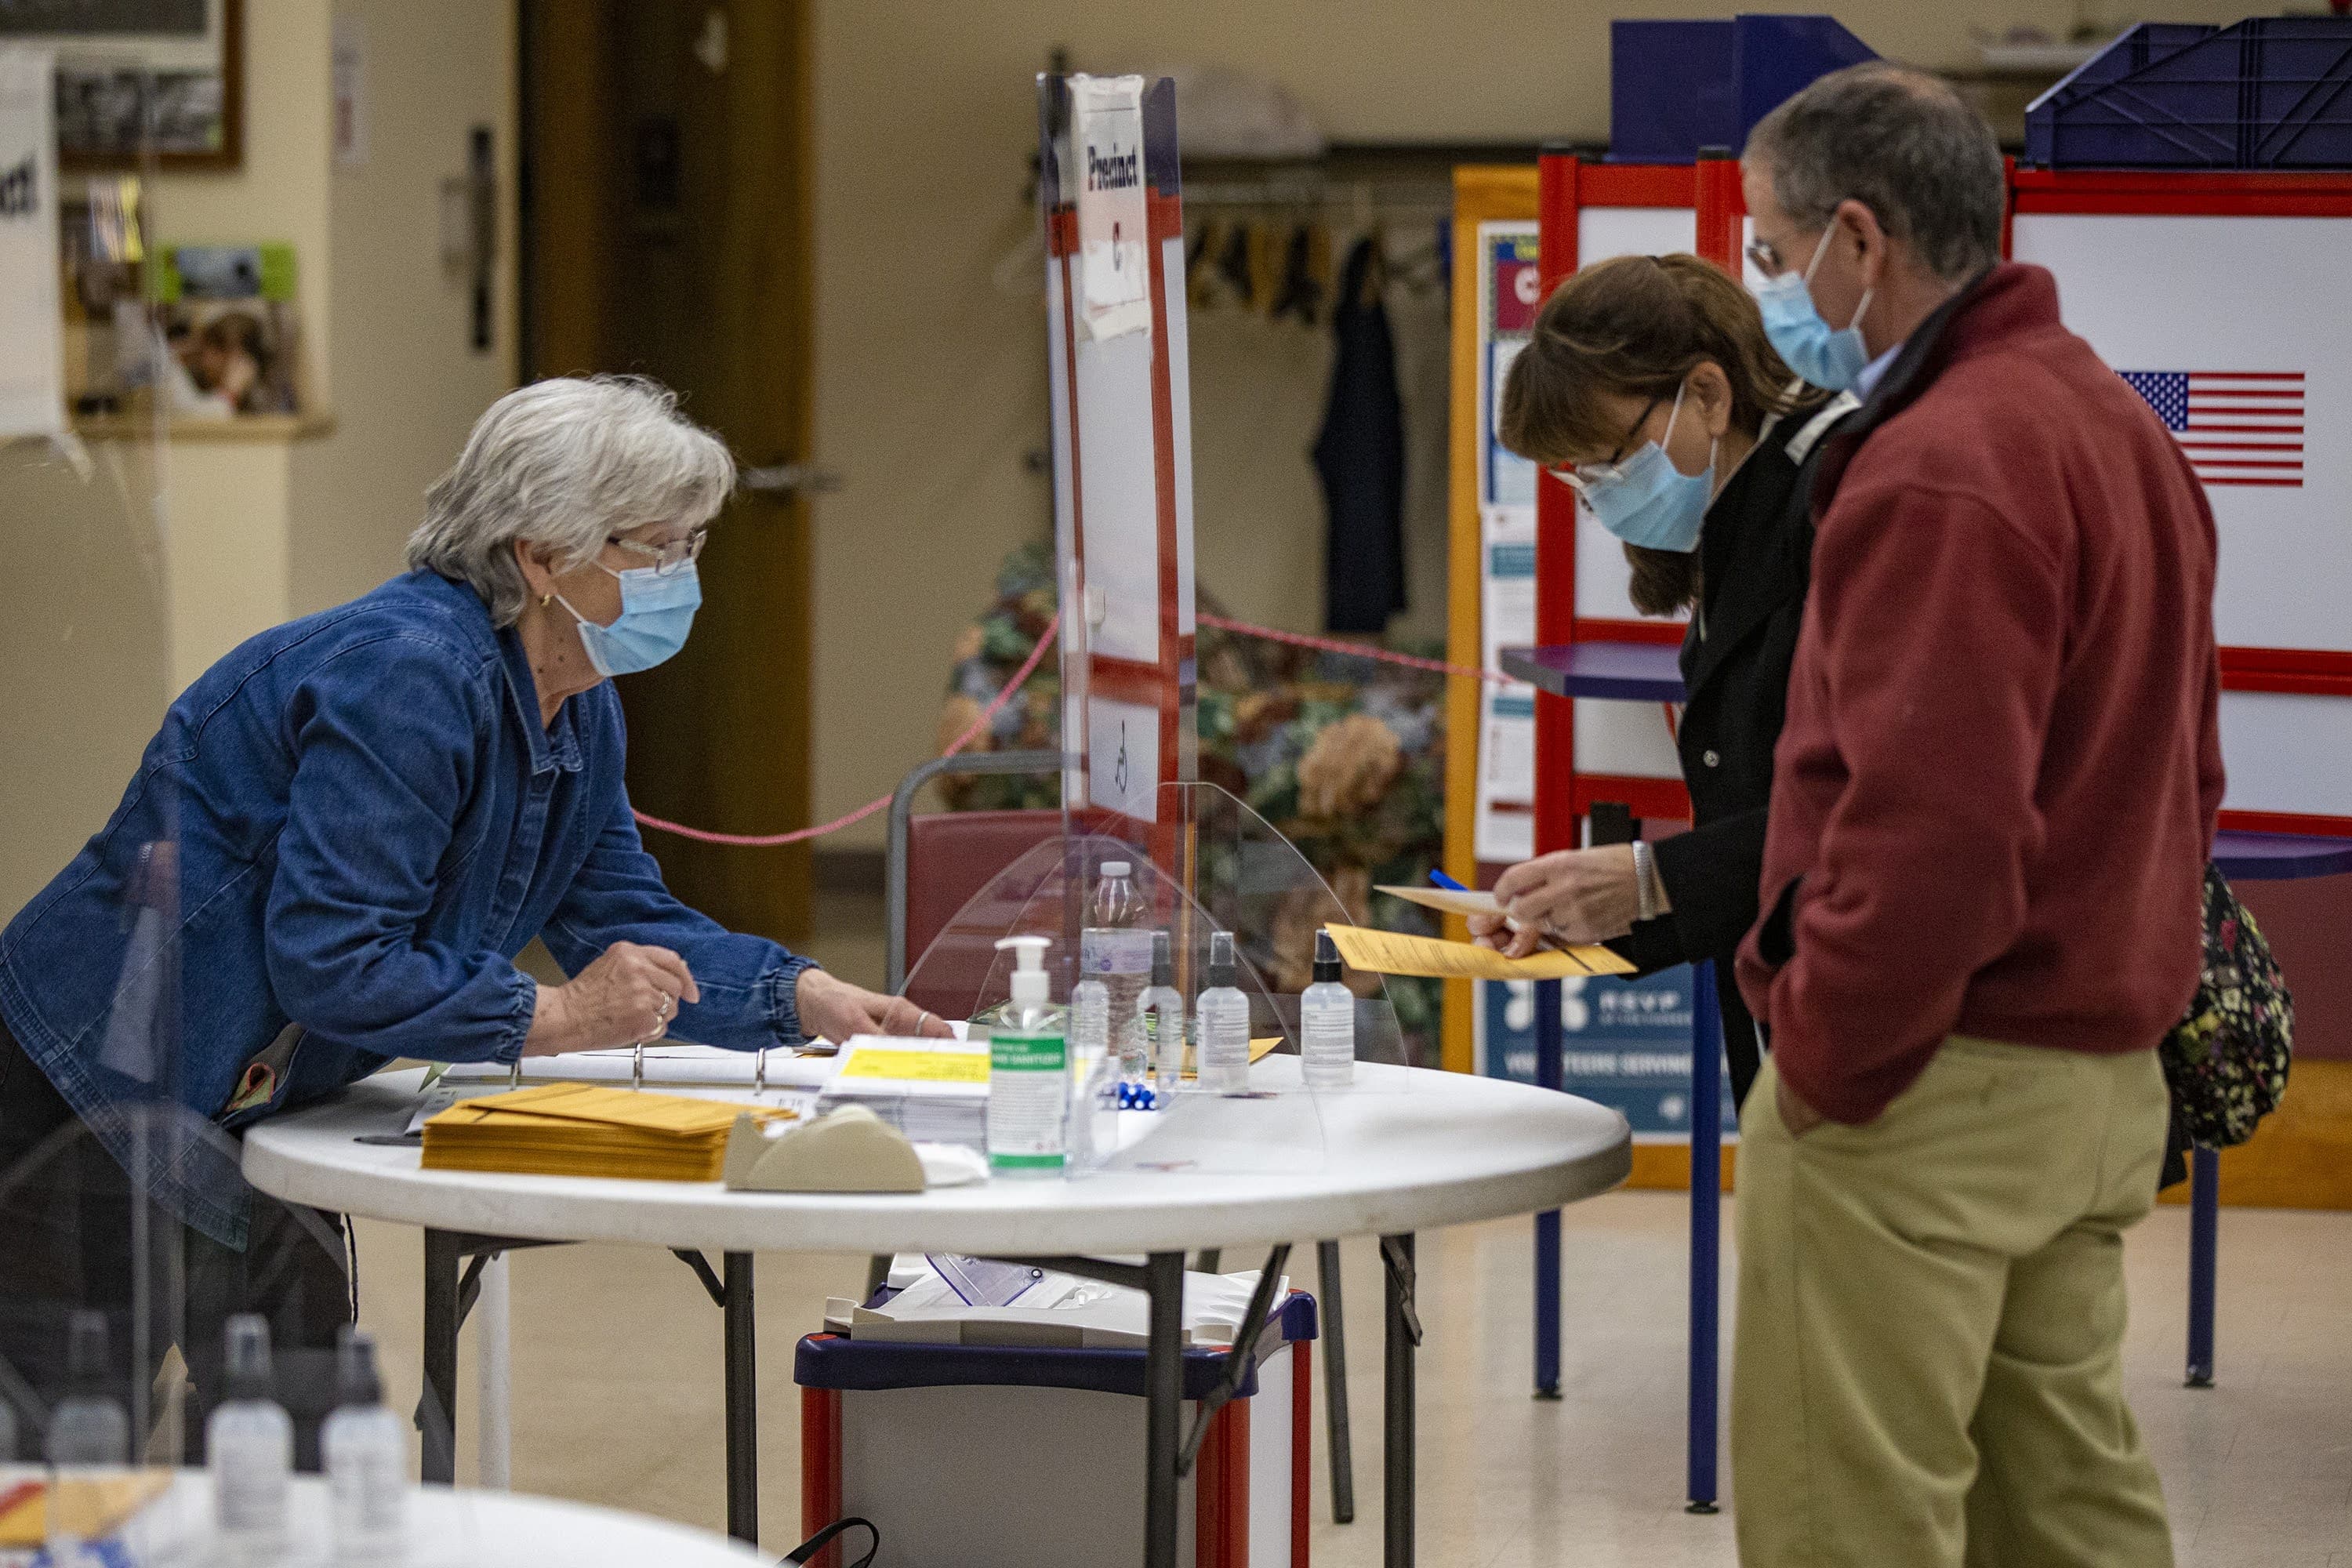 Patty and Peter Bonneau receives their ballots for early voting at a polling station inside the Ware Senior Center. (Jesse Costs/WBUR)